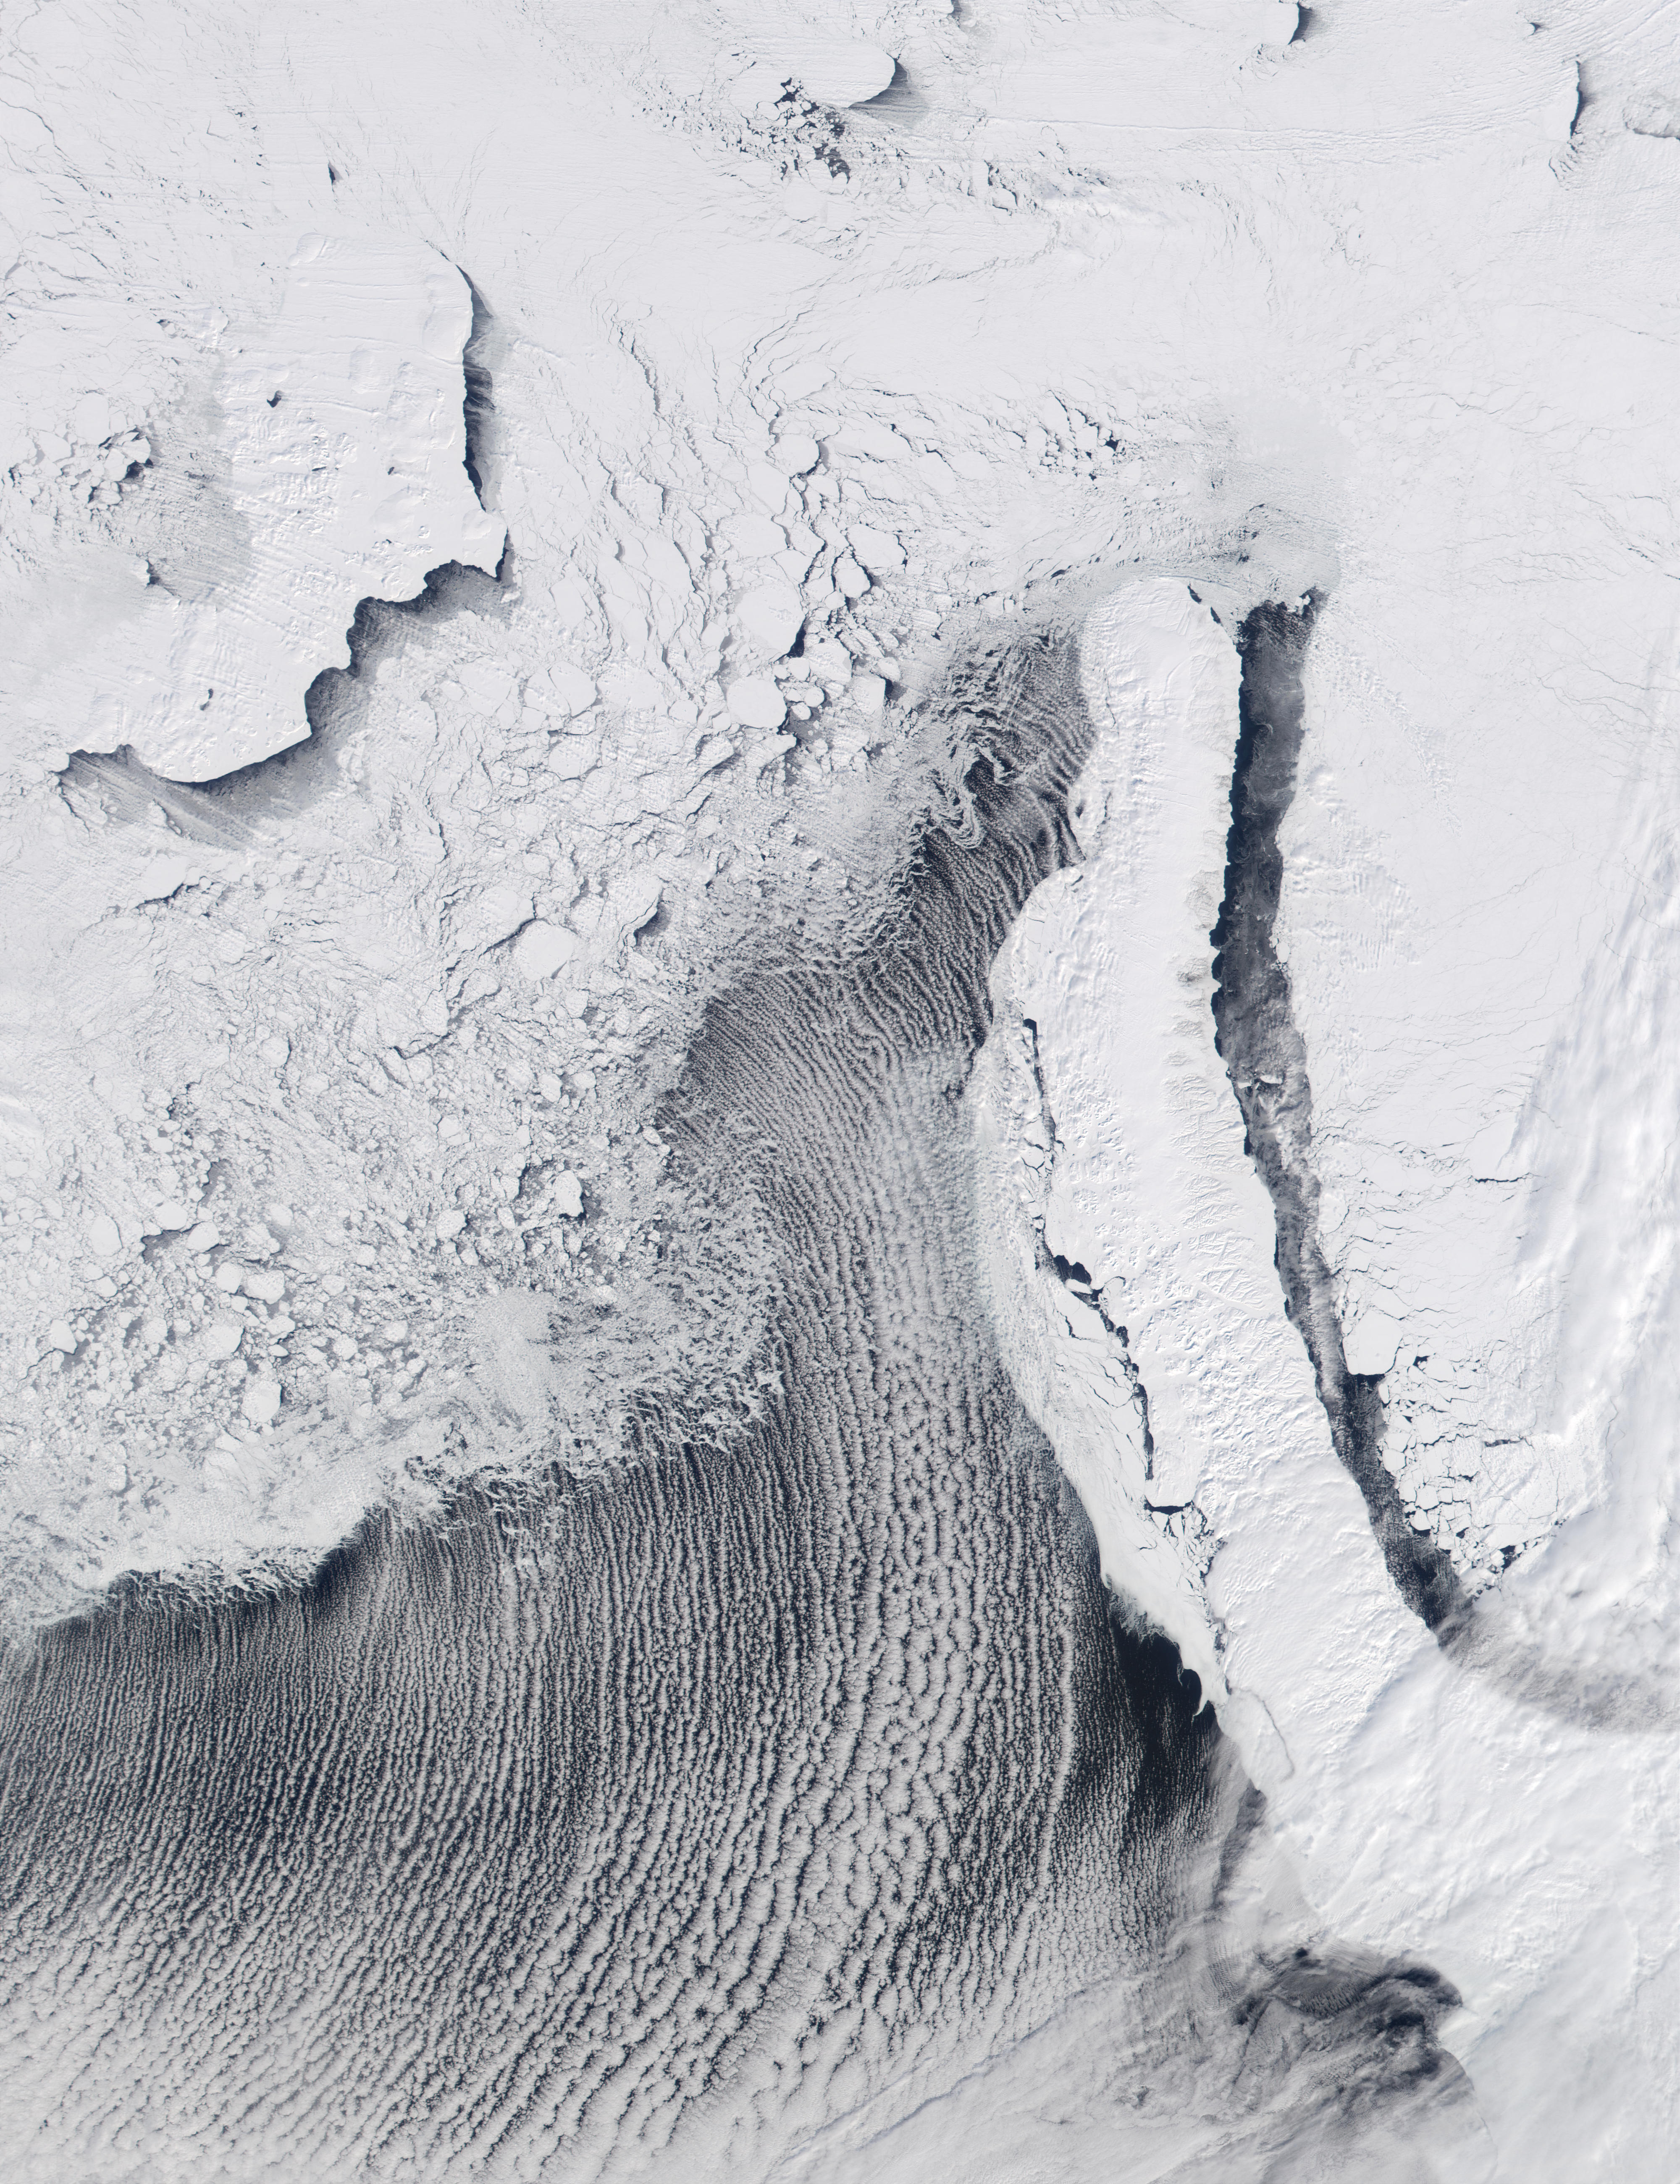 Cloud streets in Barents Sea - related image preview